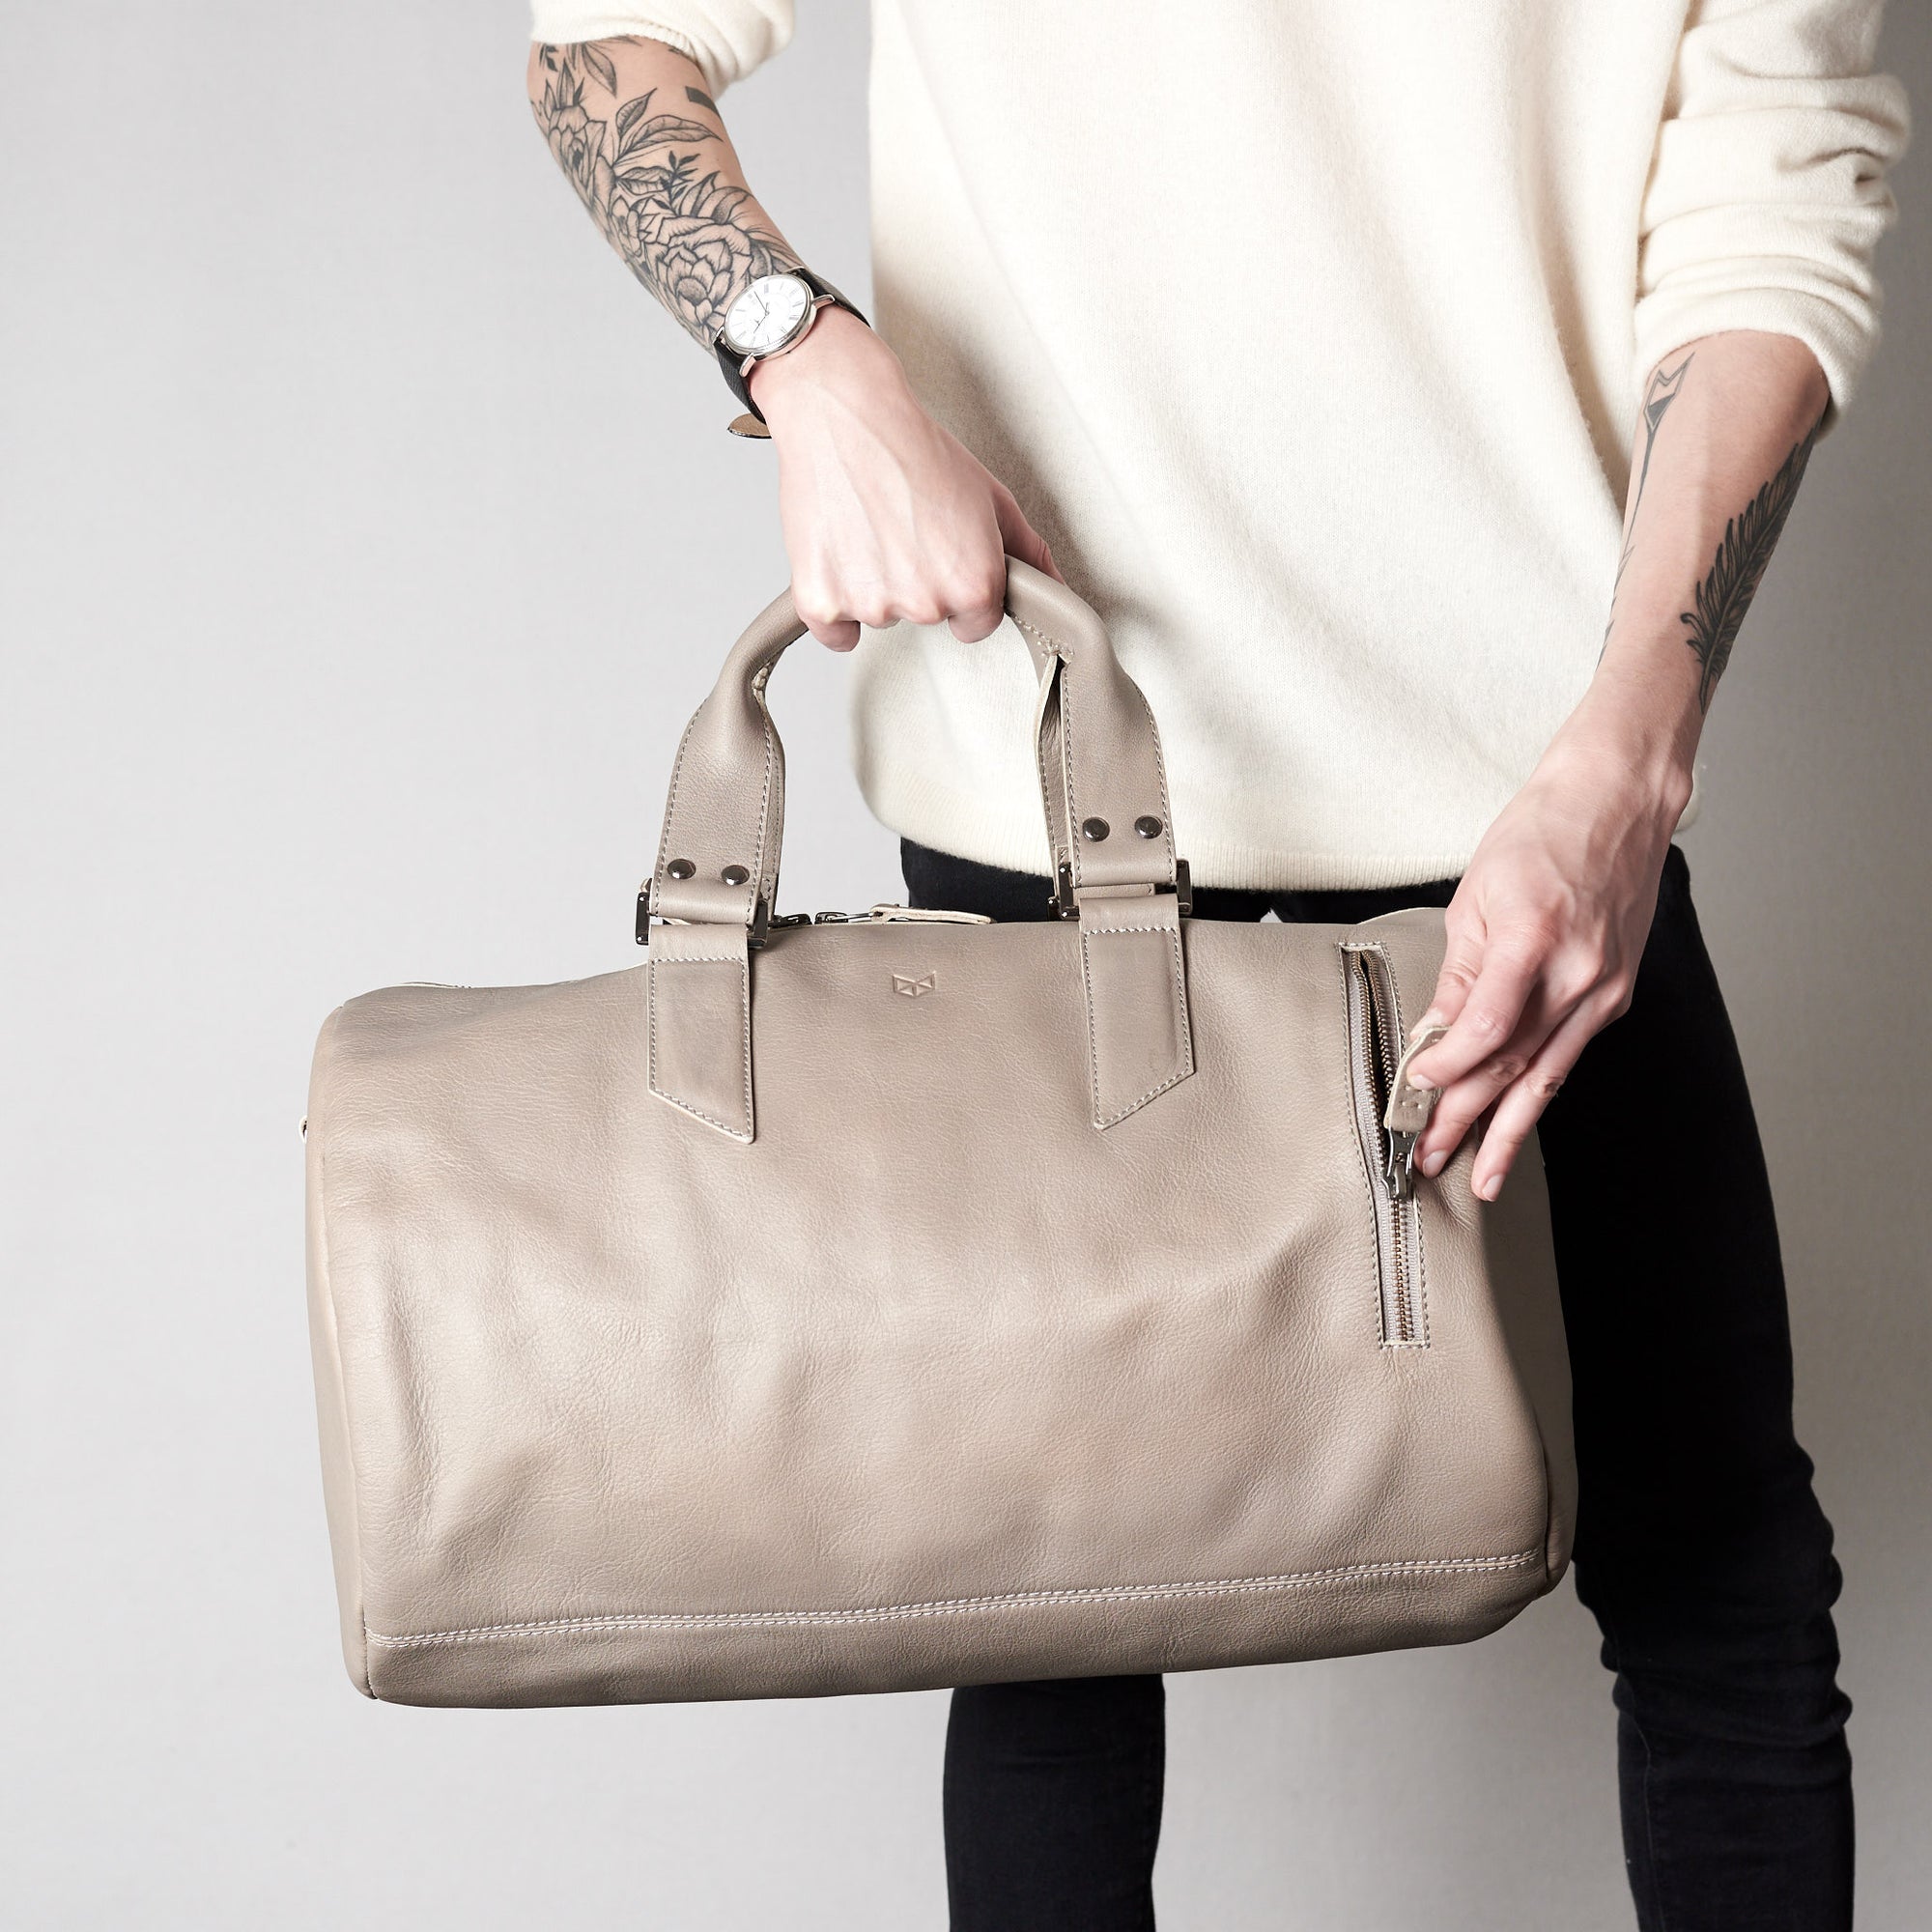 Style front pocket. Substantial grey duffle bag by Capra Leather. 